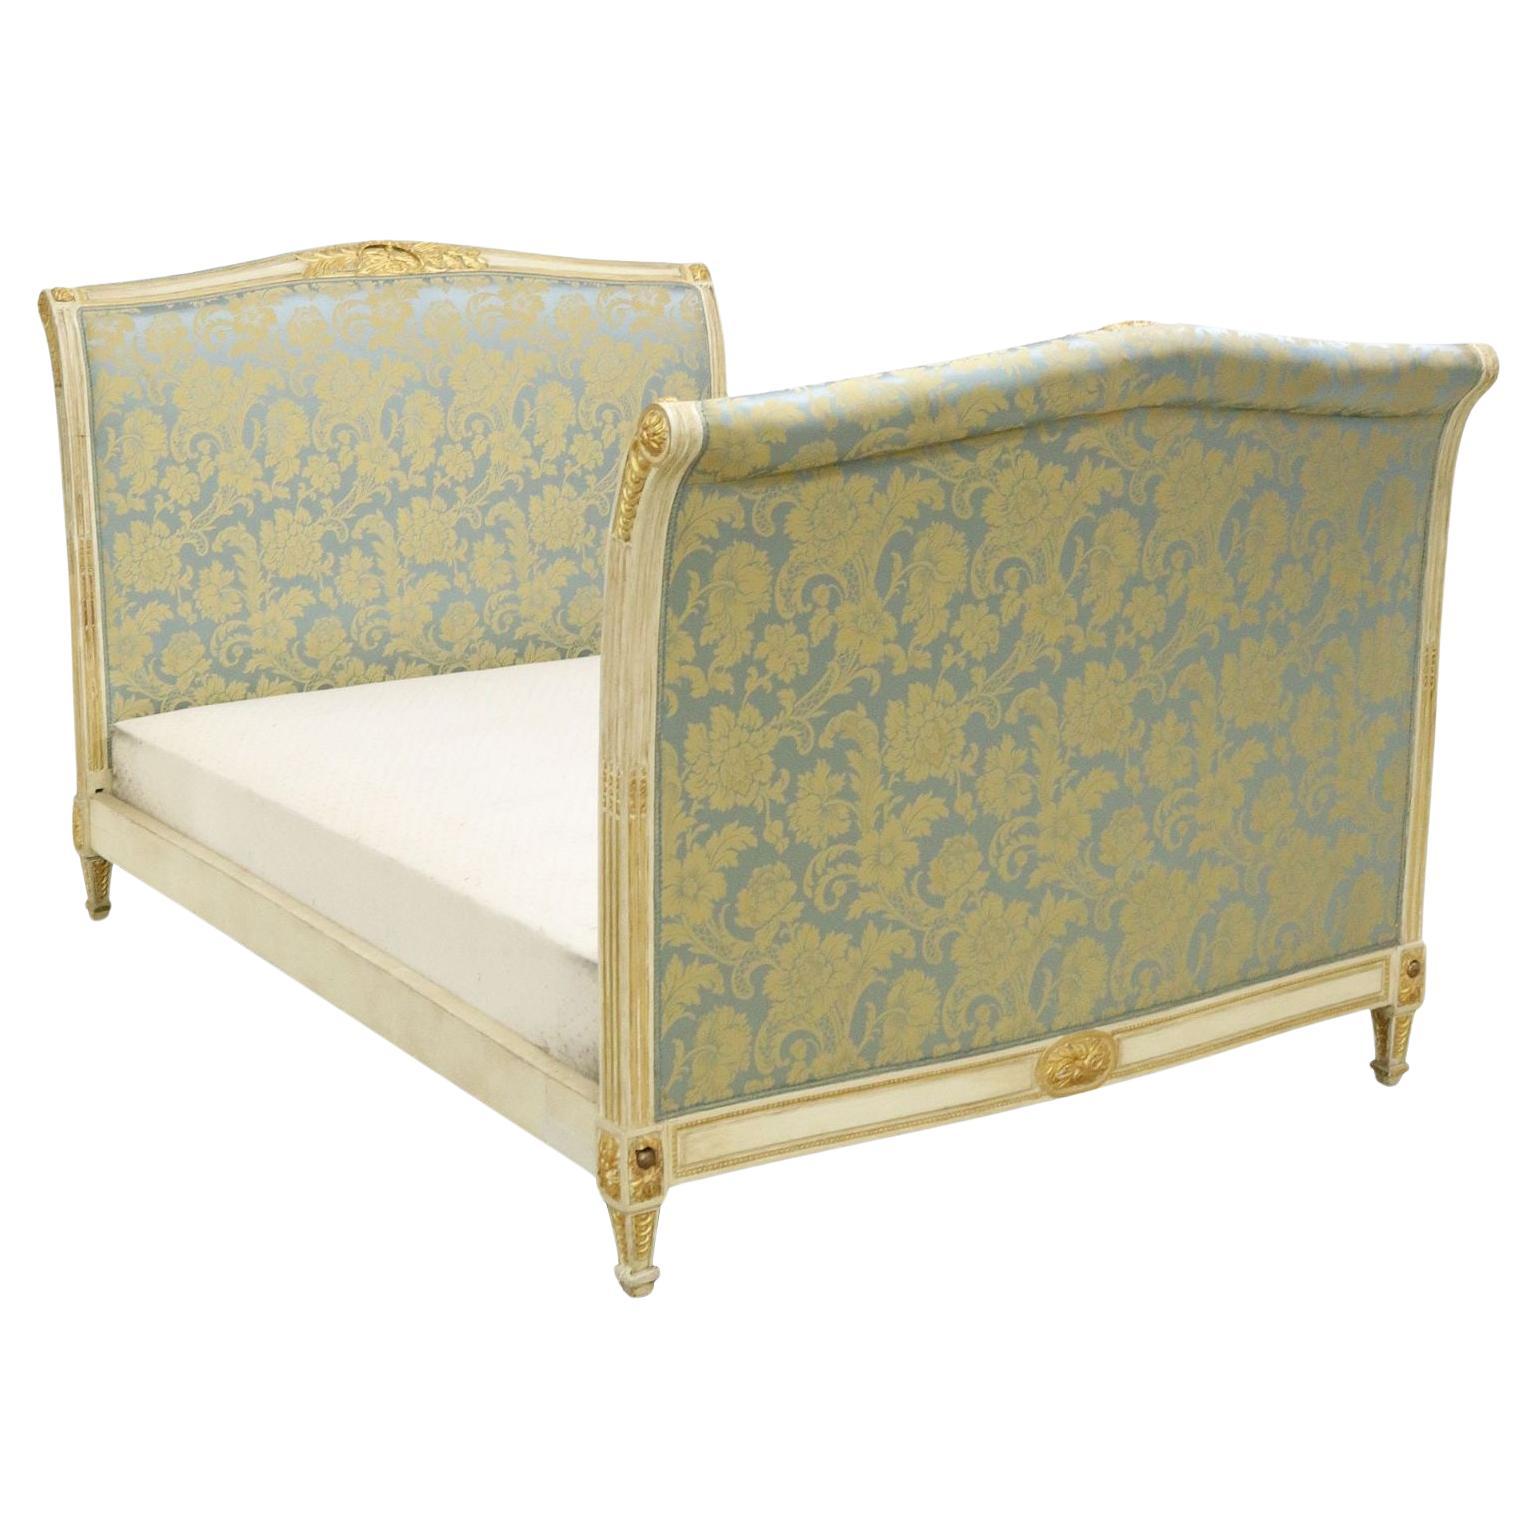 What kind of fabric is used for upholstered beds?